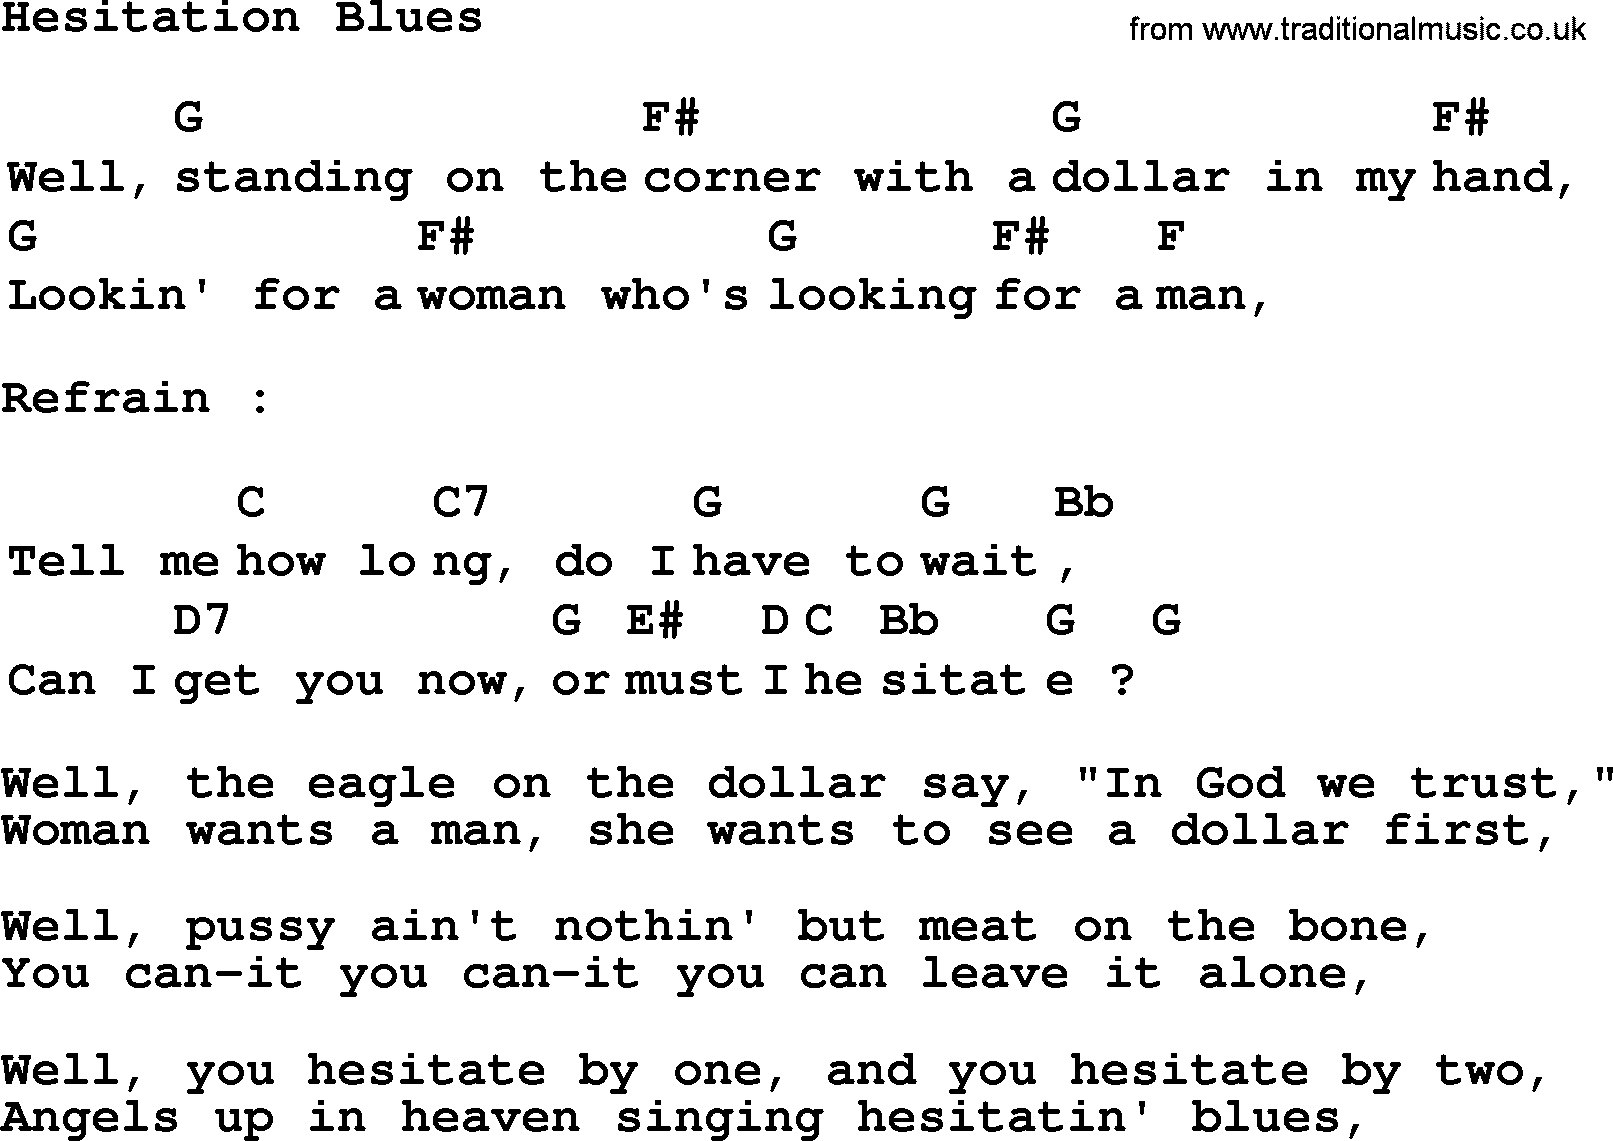 Top 1000 Most Popular Folk and Old-time Songs: Hesitation Blues, lyrics and chords